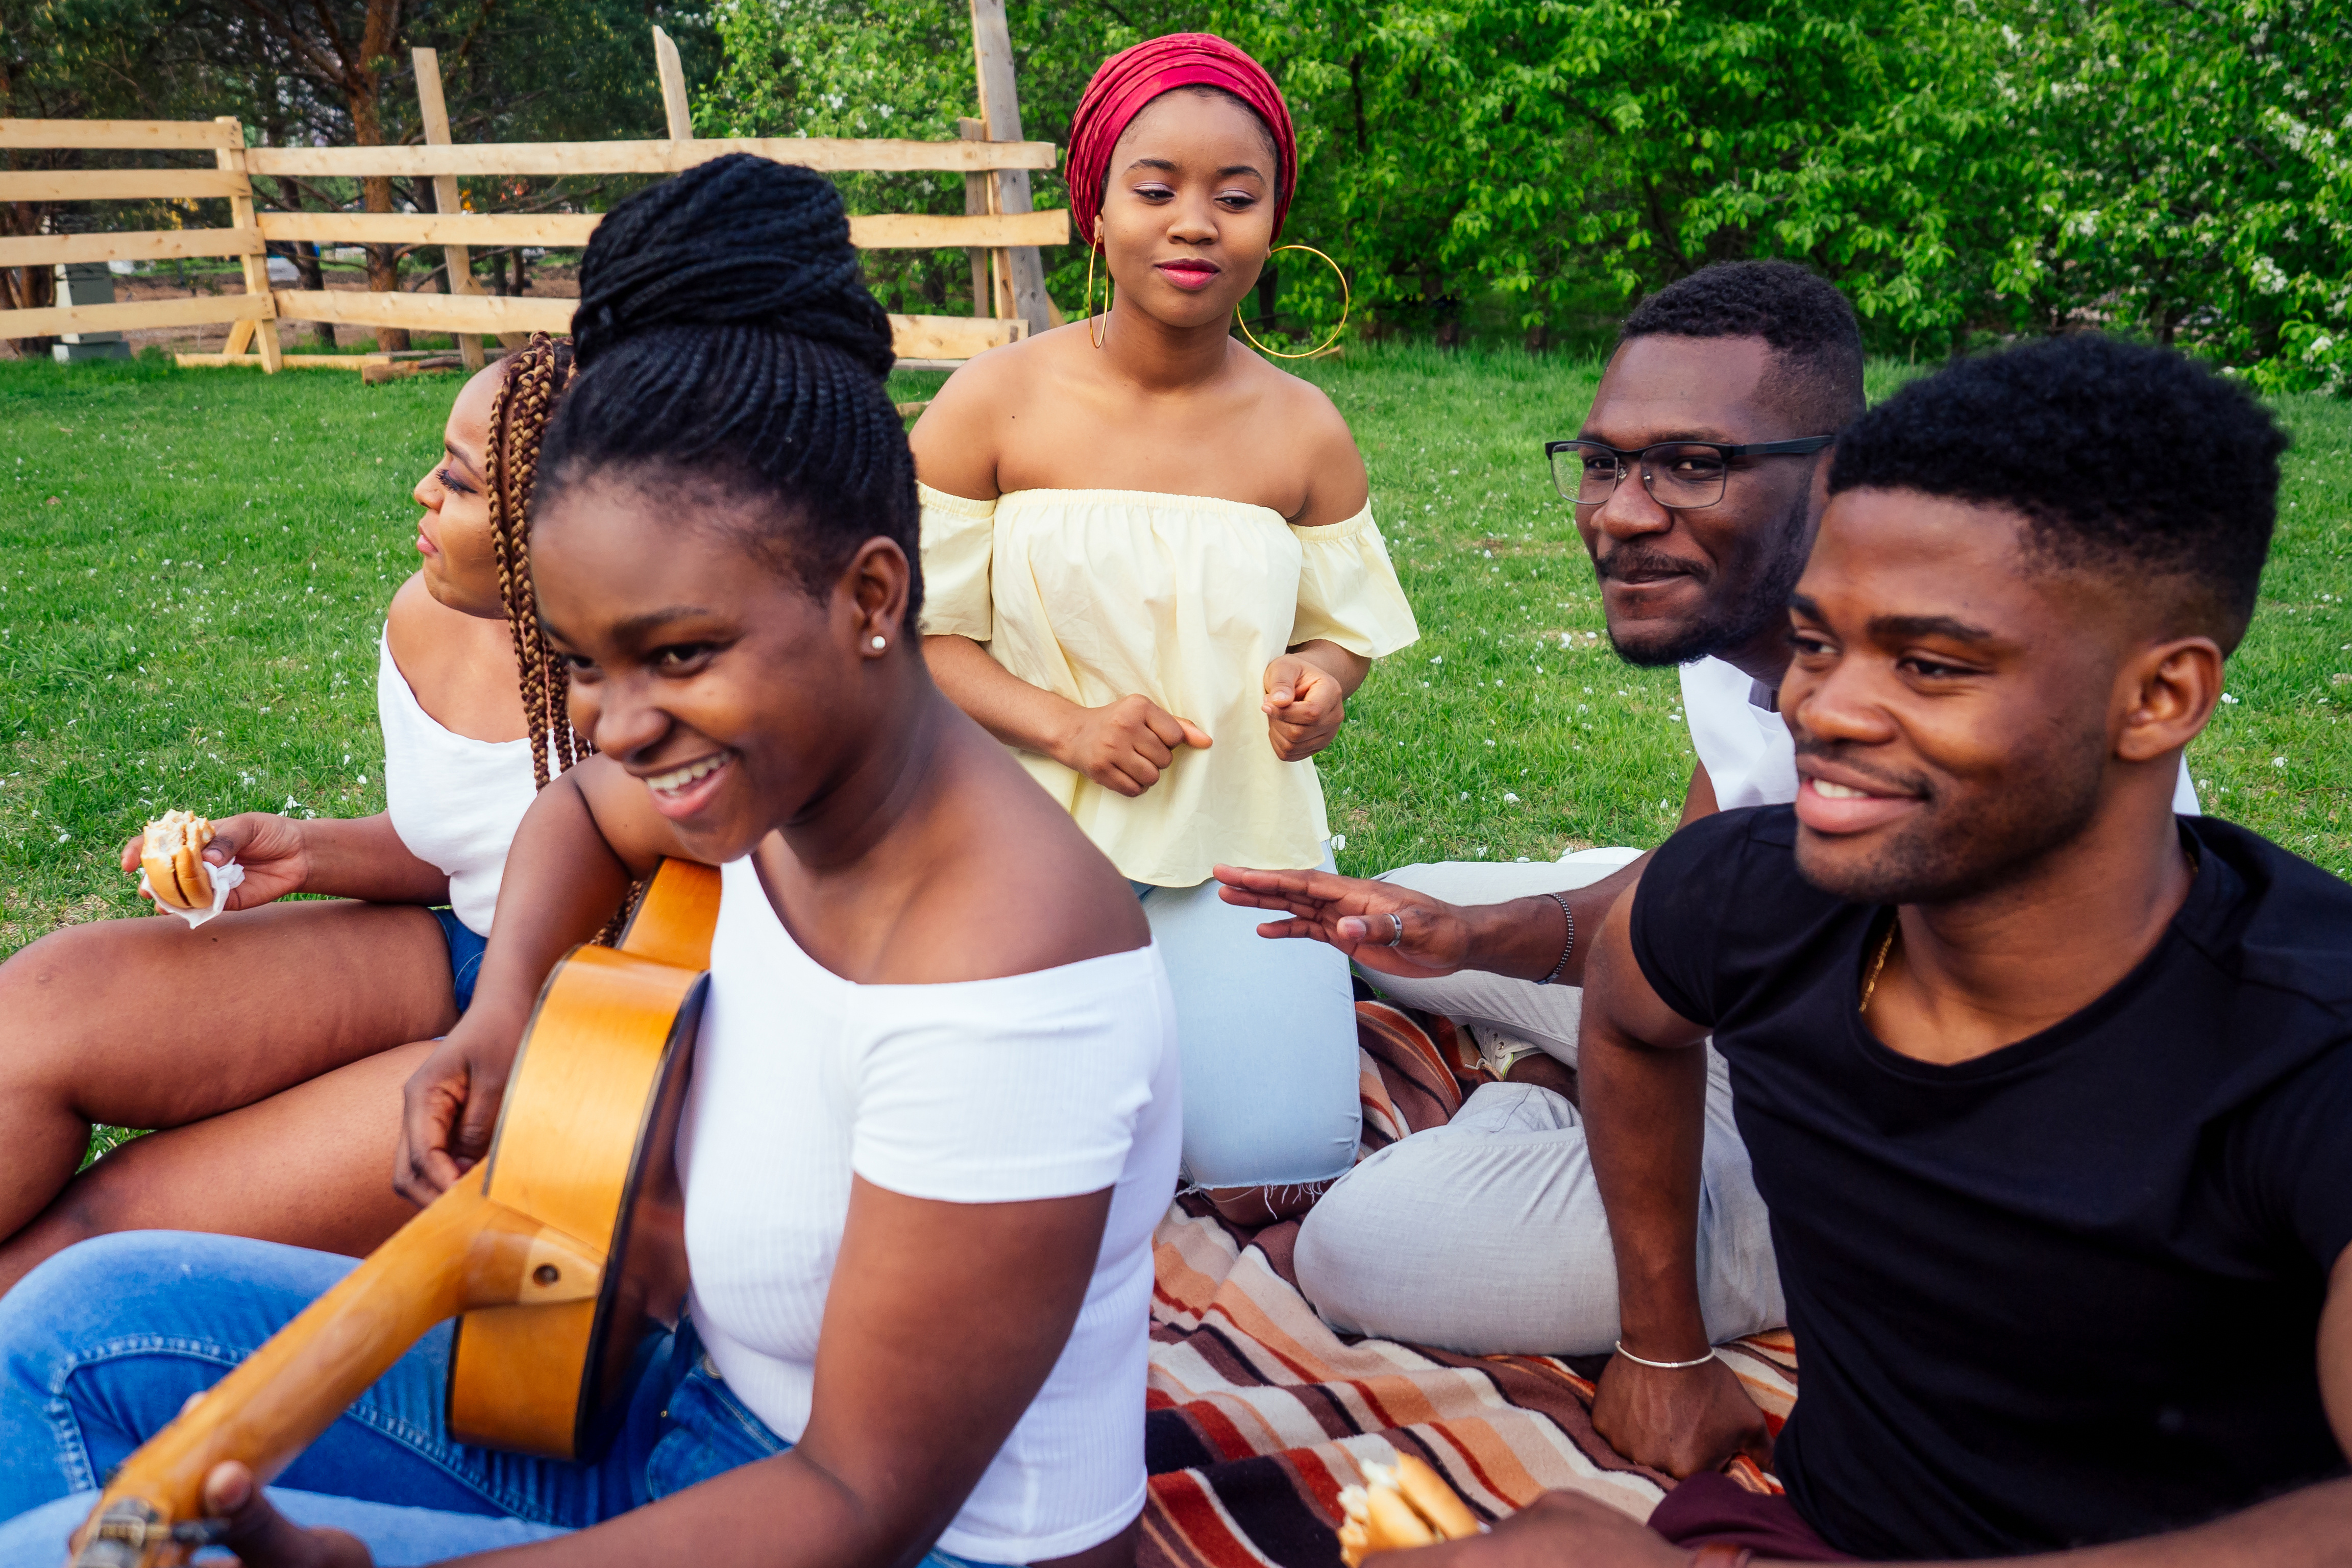 a group of teens play instruments and sit together in a park